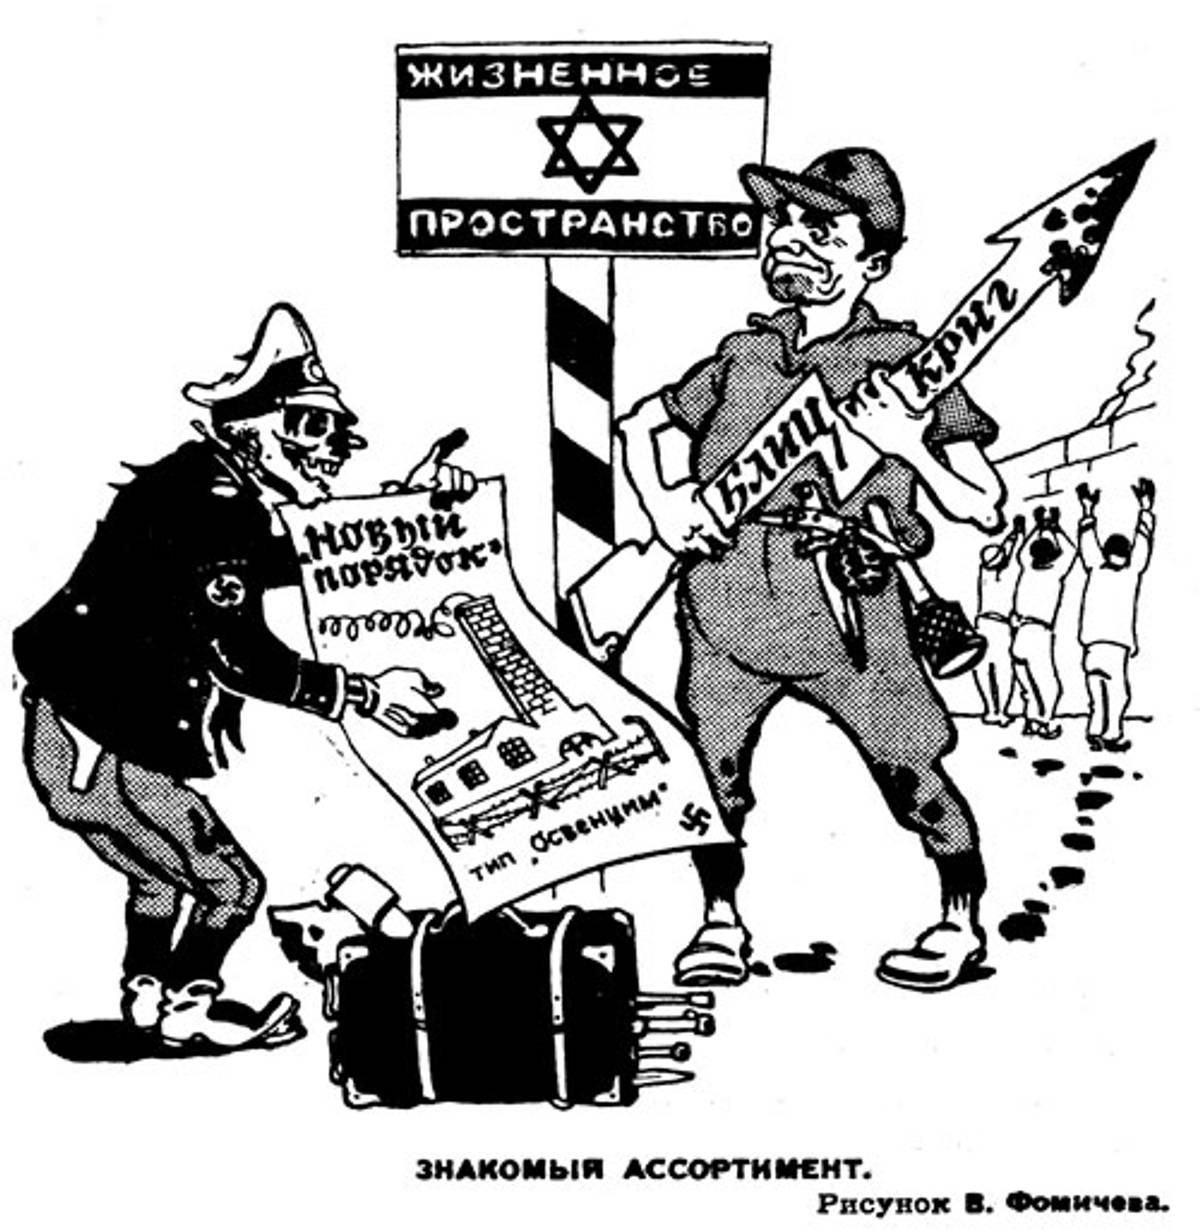 Fig. 16: ‘The familiar wares,’ V. Fomichev, Sovetskaya Rossia, Aug. 11, 1967. (From The Israeli-Arab Conflict in Soviet Caricatures, 1967–1973 by Yeshayahu Nir, Tcherikover Publishers, 1976)